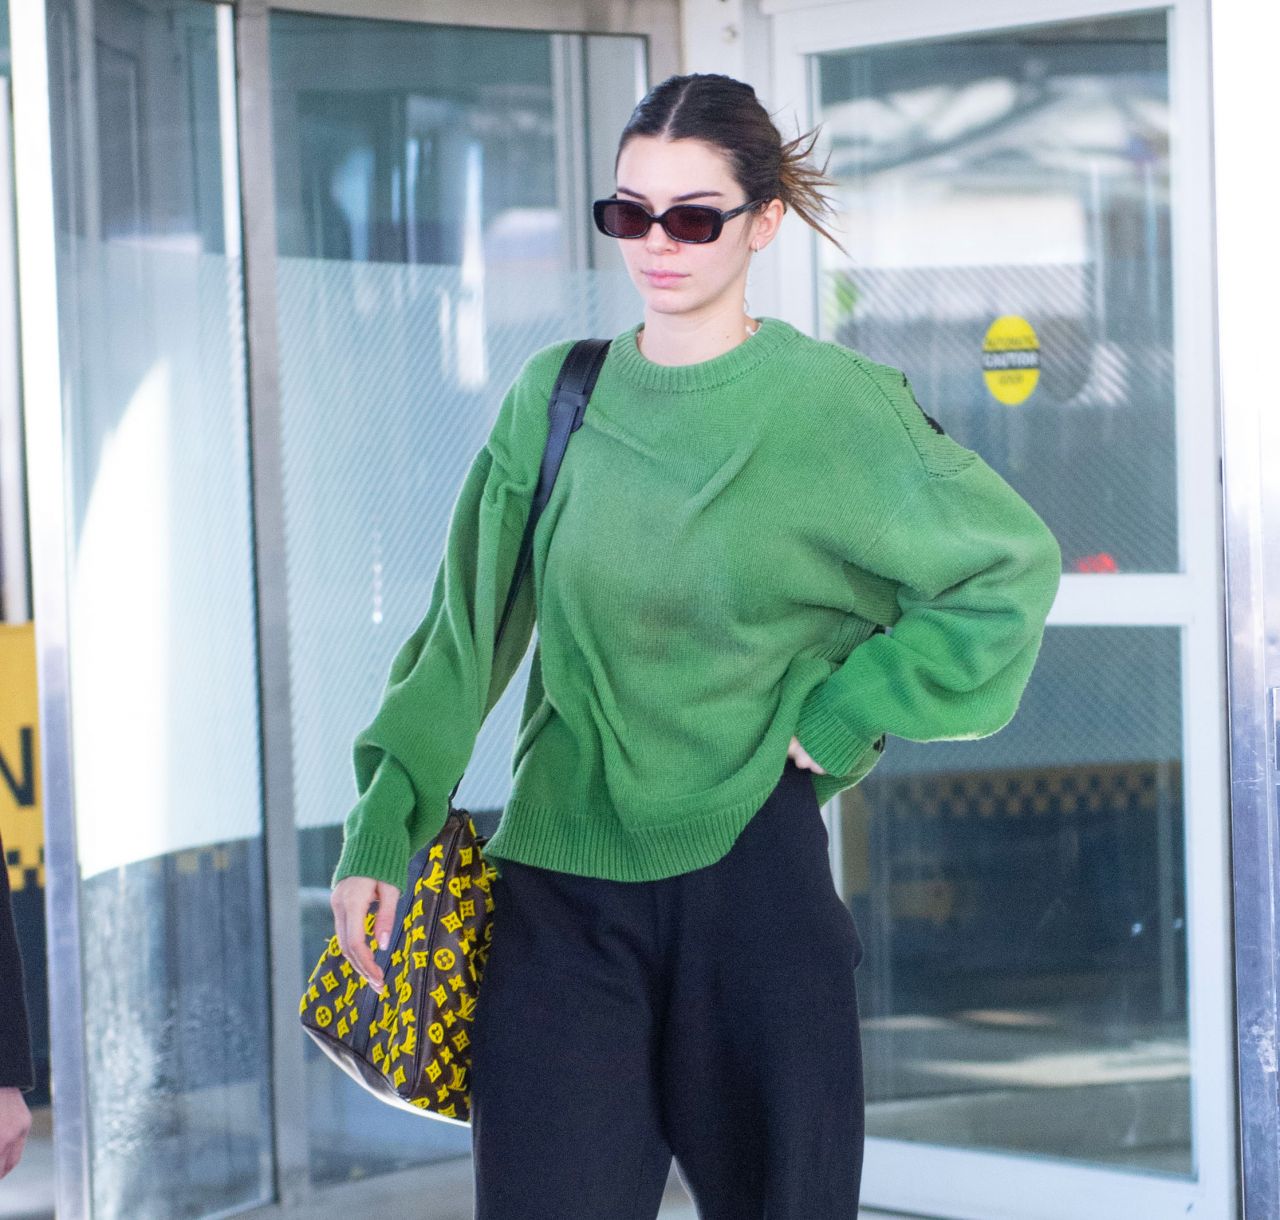 kendall jenner arrives at jfk airport in new york city-130519_1